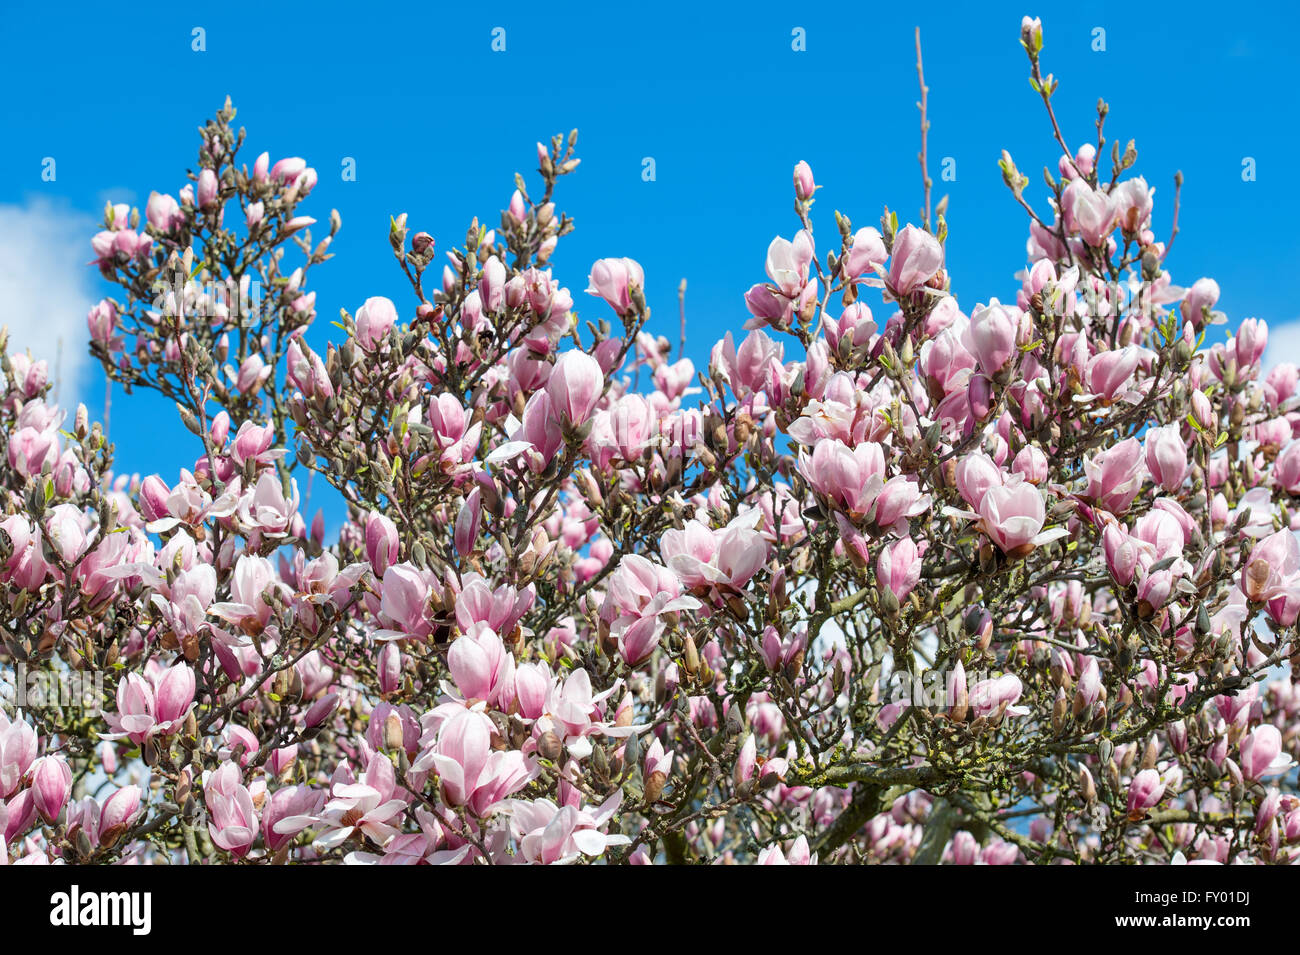 Magnolia tree over blue sky. Blossoming of spring pink flowers Stock Photo